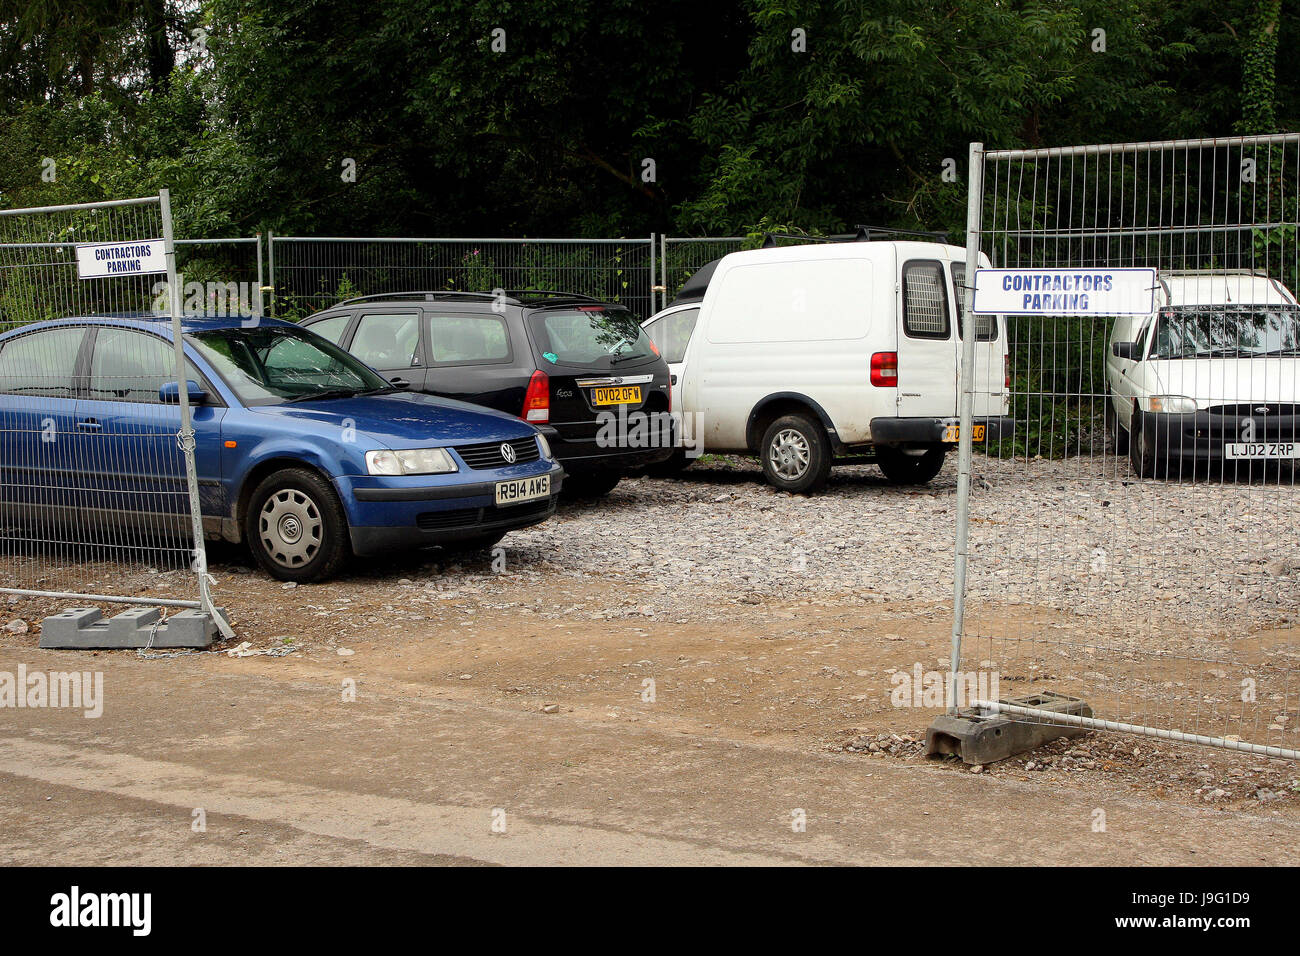 Temporary car park with fencing on a construction site Stock Photo